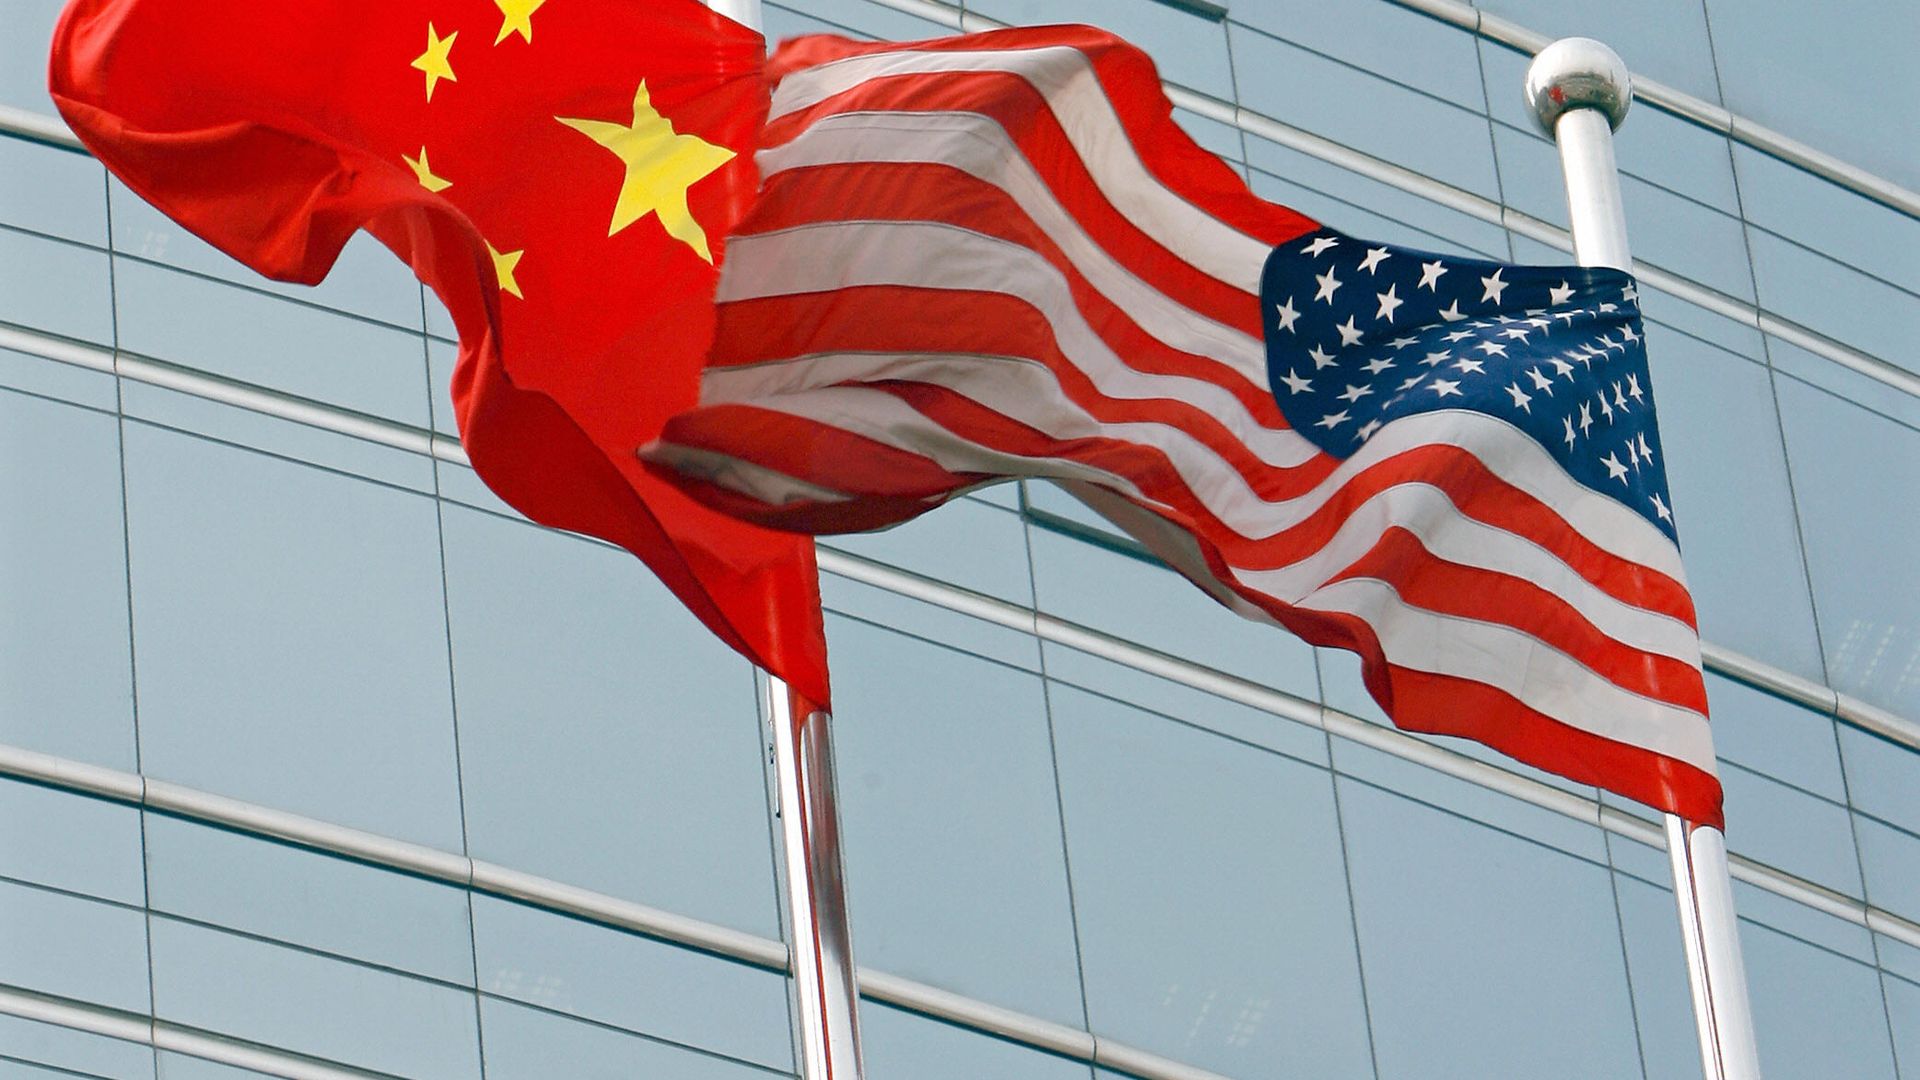 Beijing, CHINA: A US and a Chinese flag wave outside a commercial building in Beijing, 09 July 2007.